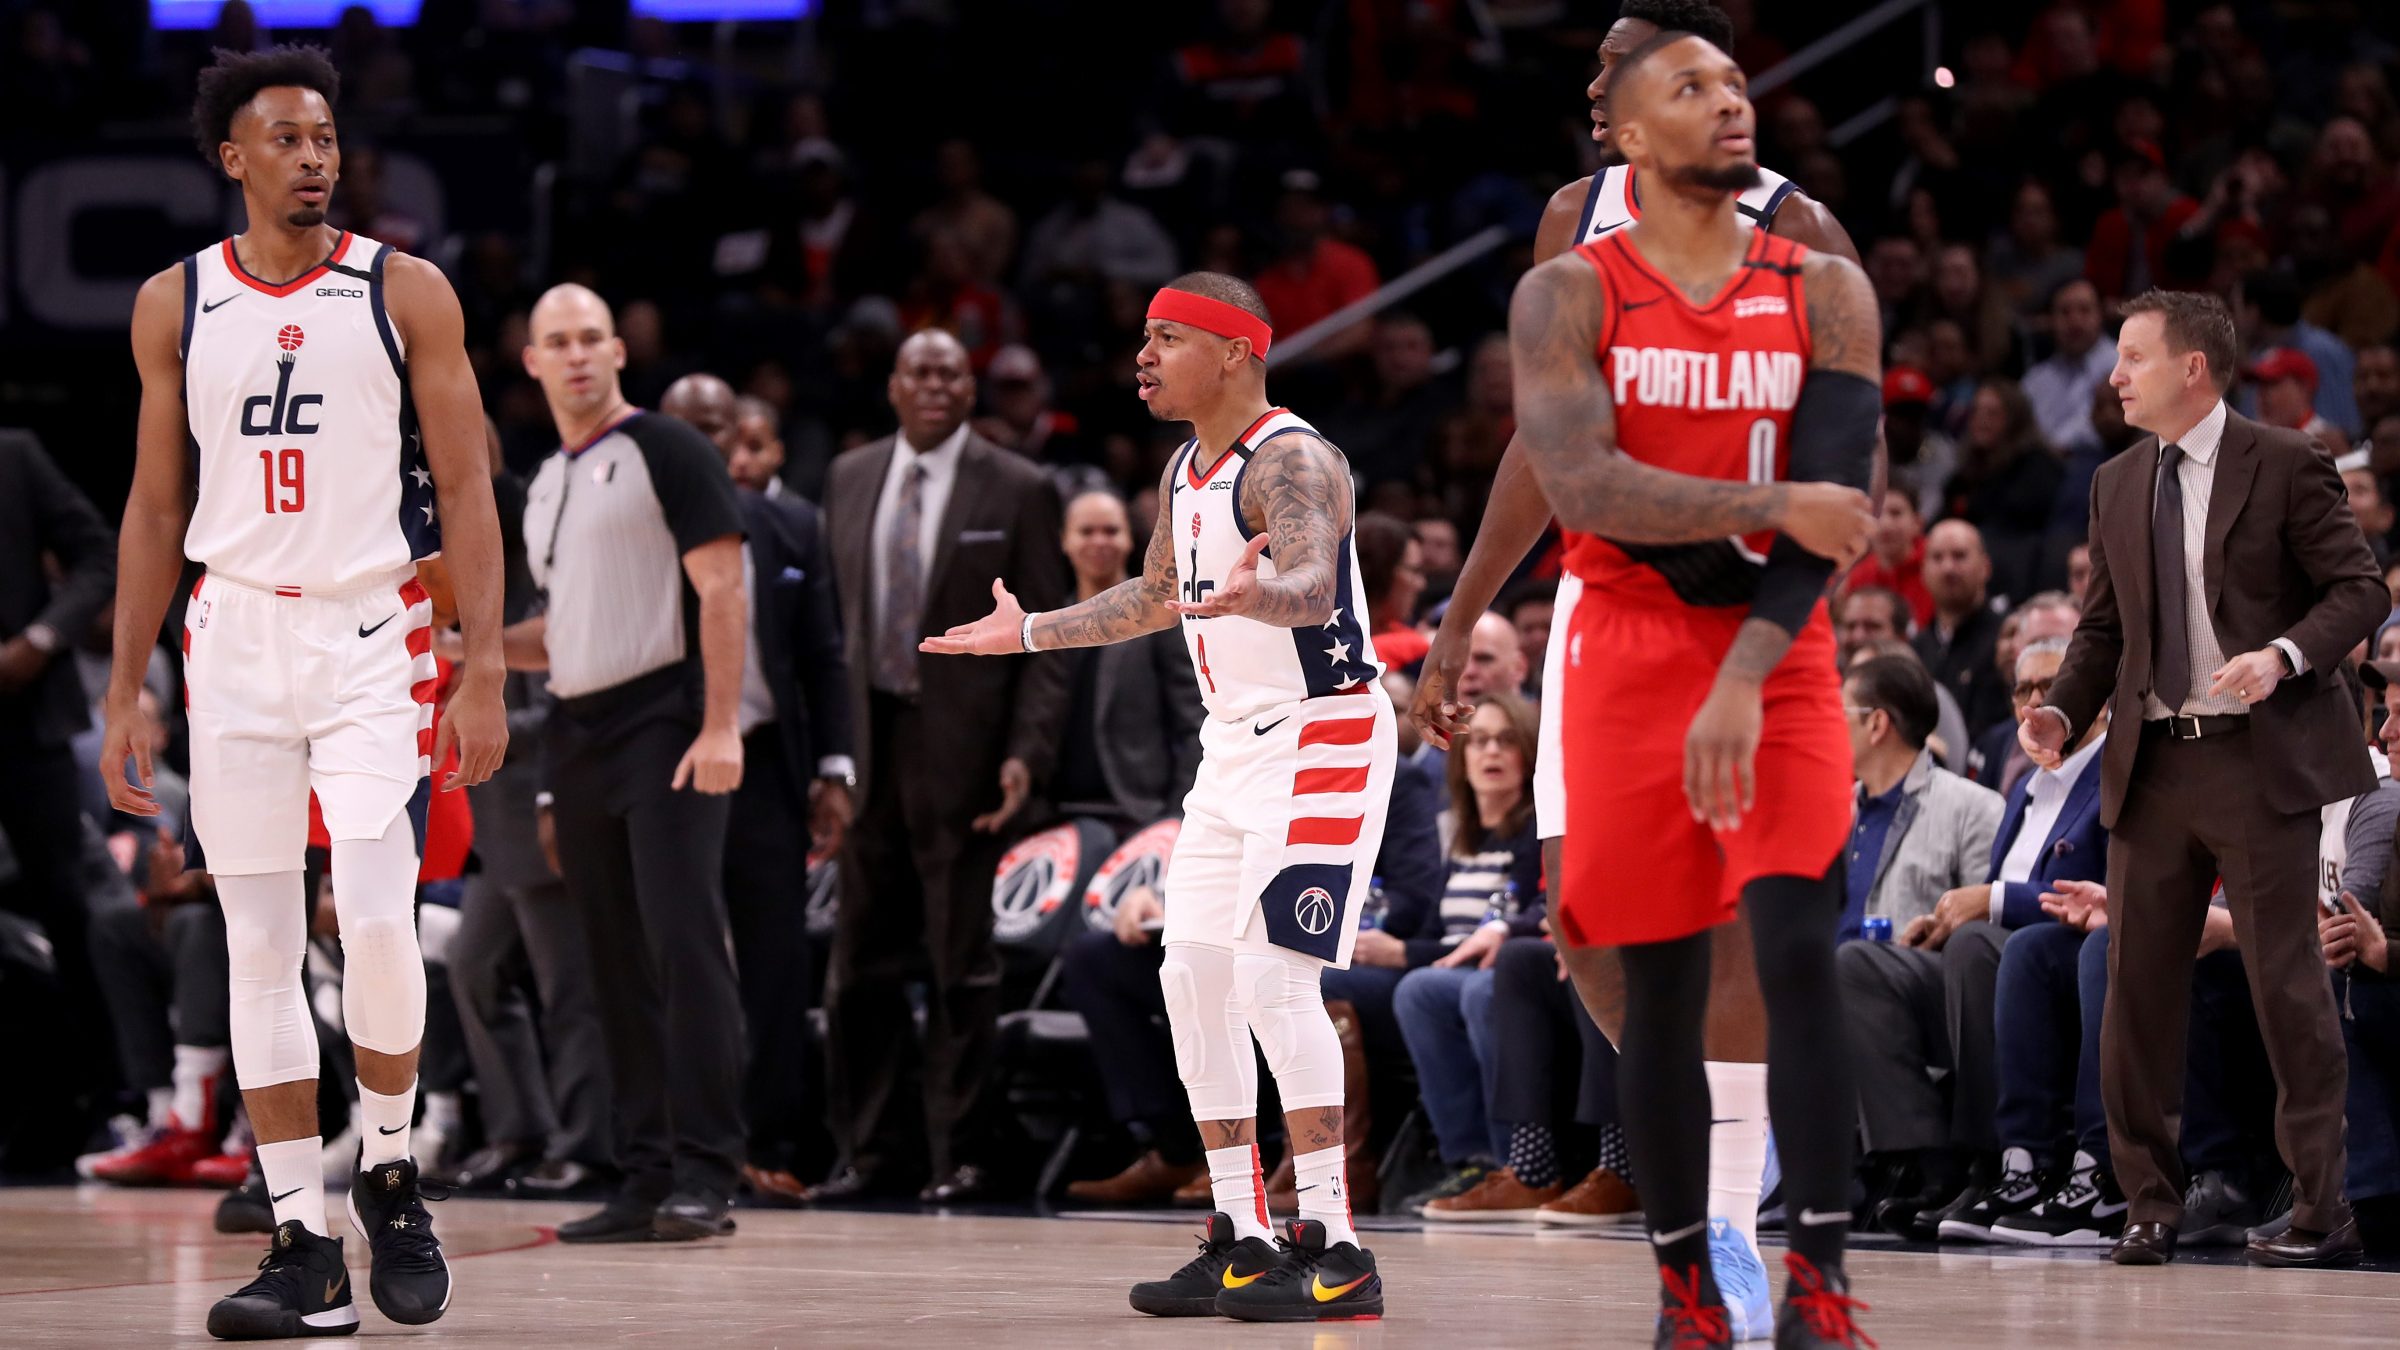 Isaiah Thomas of the Washington Wizards reacts after being ejected during the first quarter against the Portland Trail Blazers at Capital One Arena on January 03, 2020 in Washington, DC.